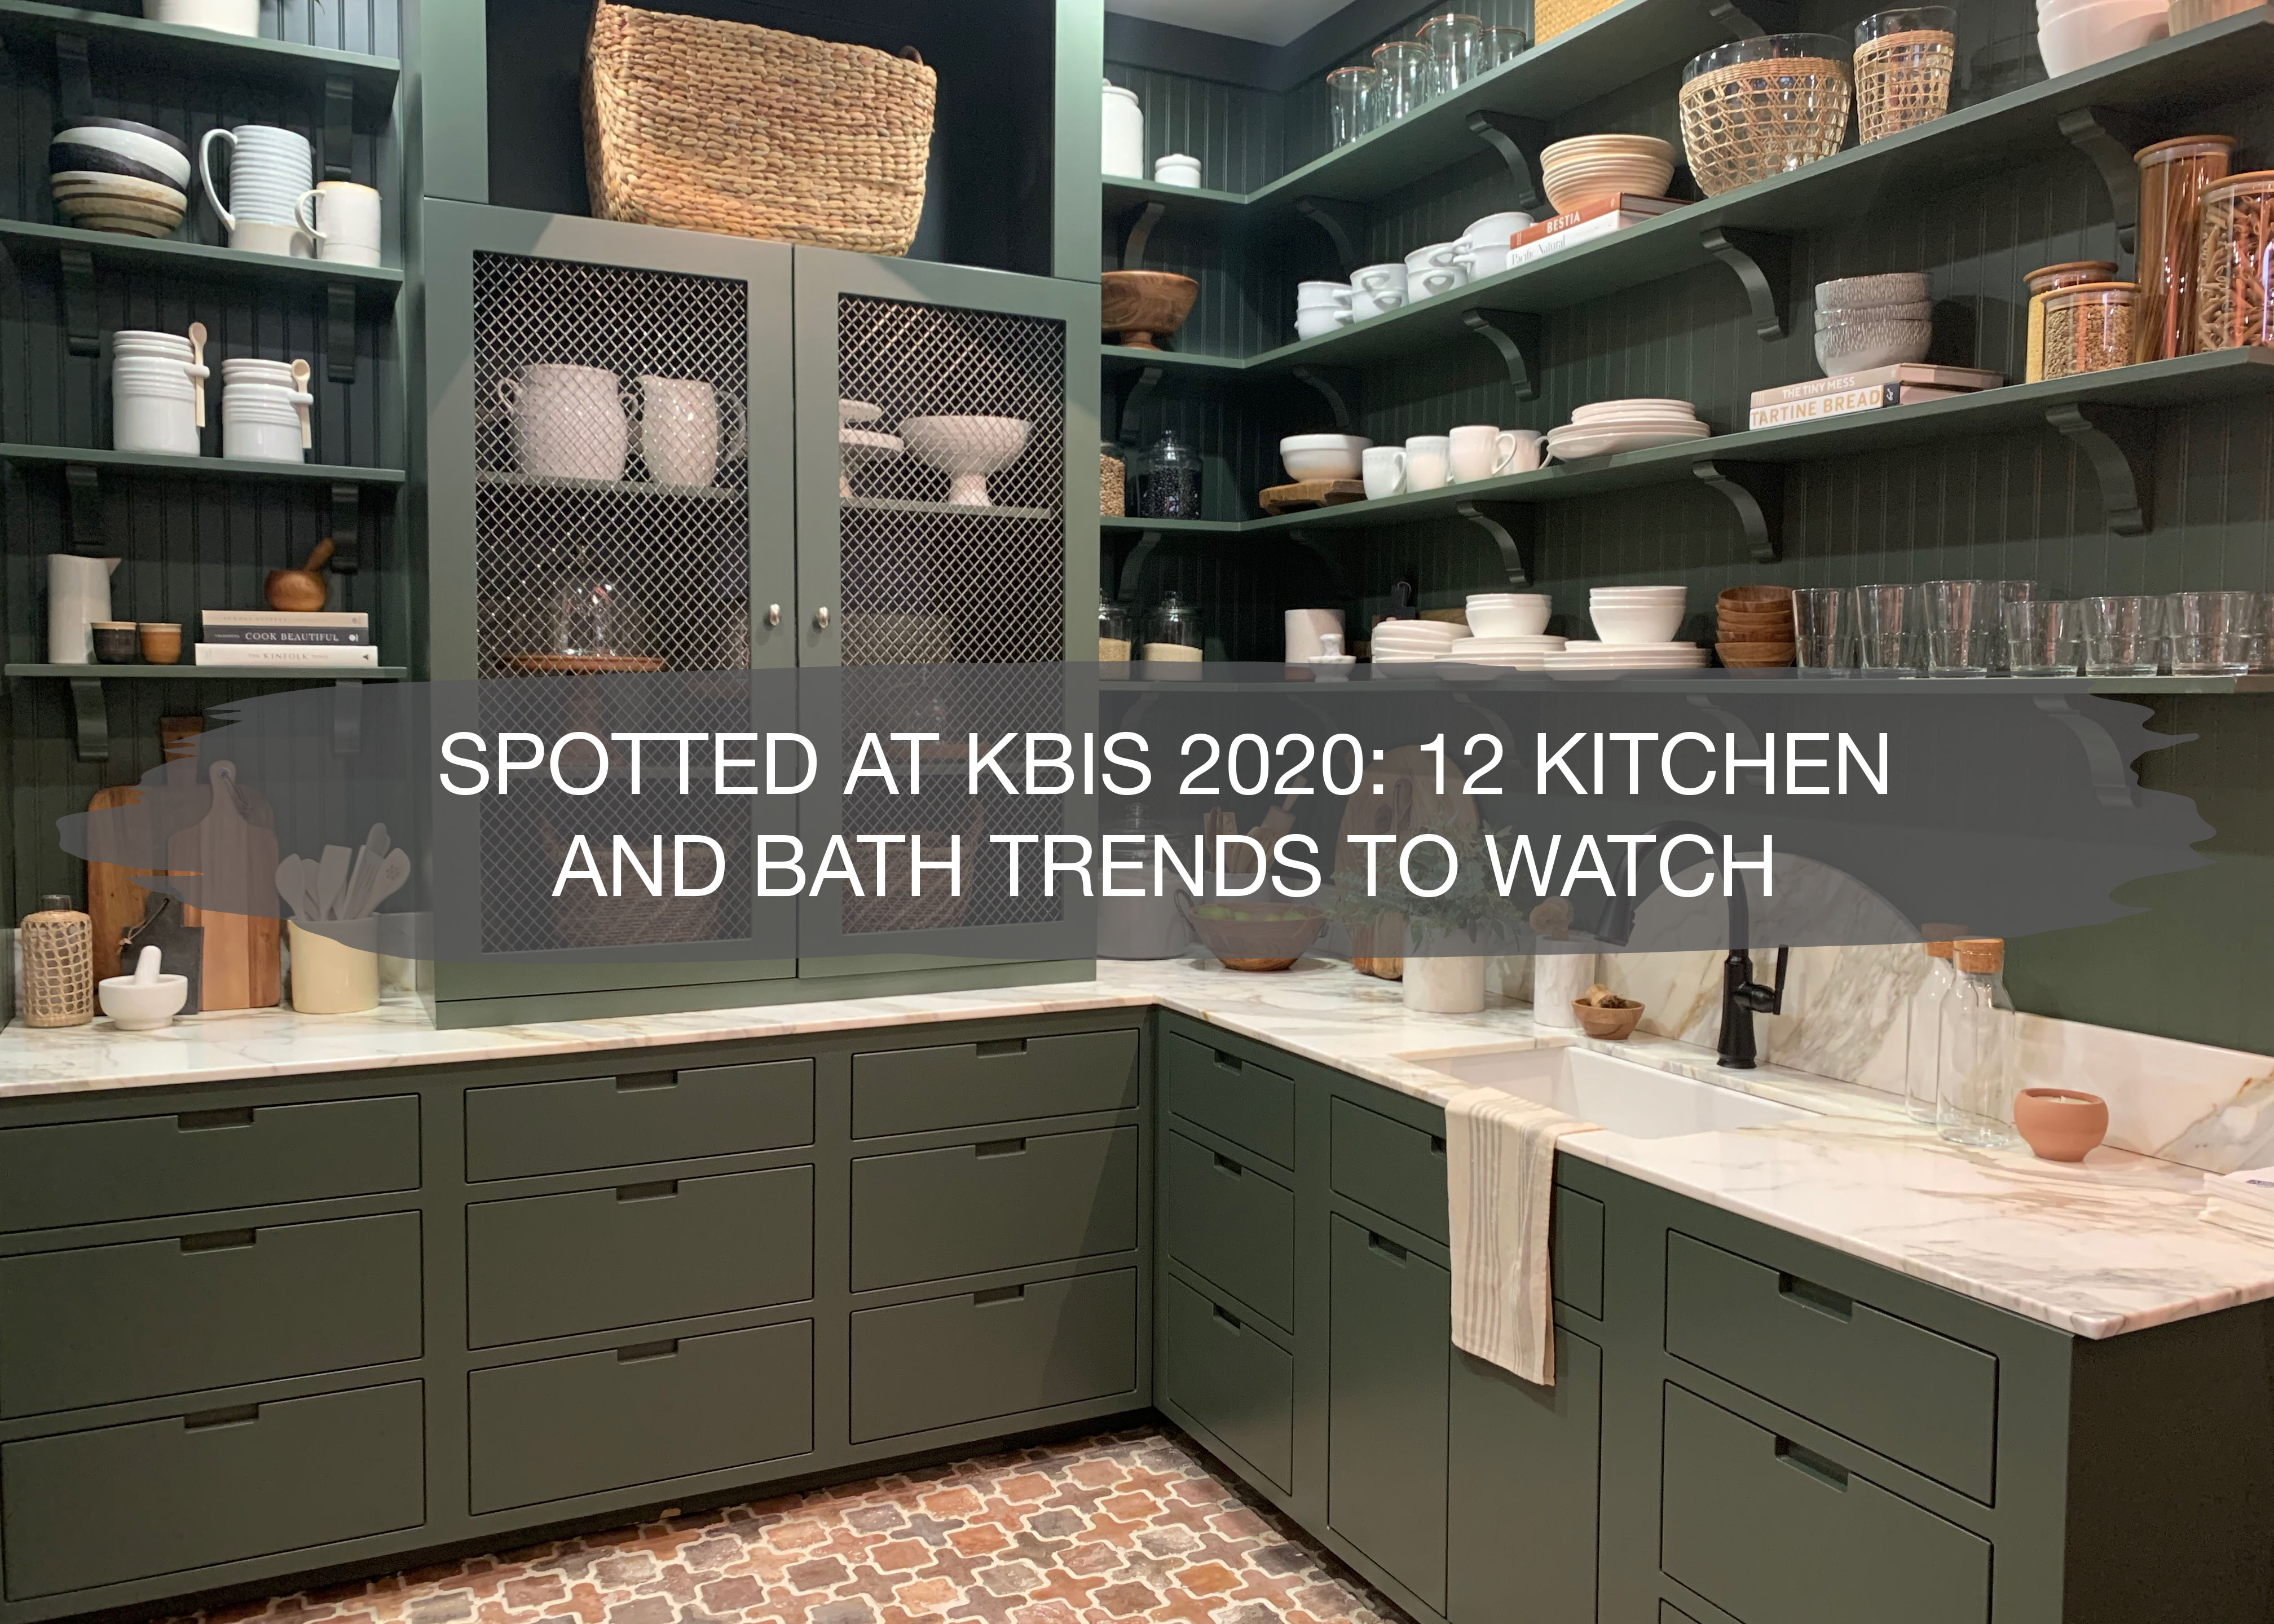 Spotted at KBIS 2020: 12 Kitchen and Bath Trends to Watch 1